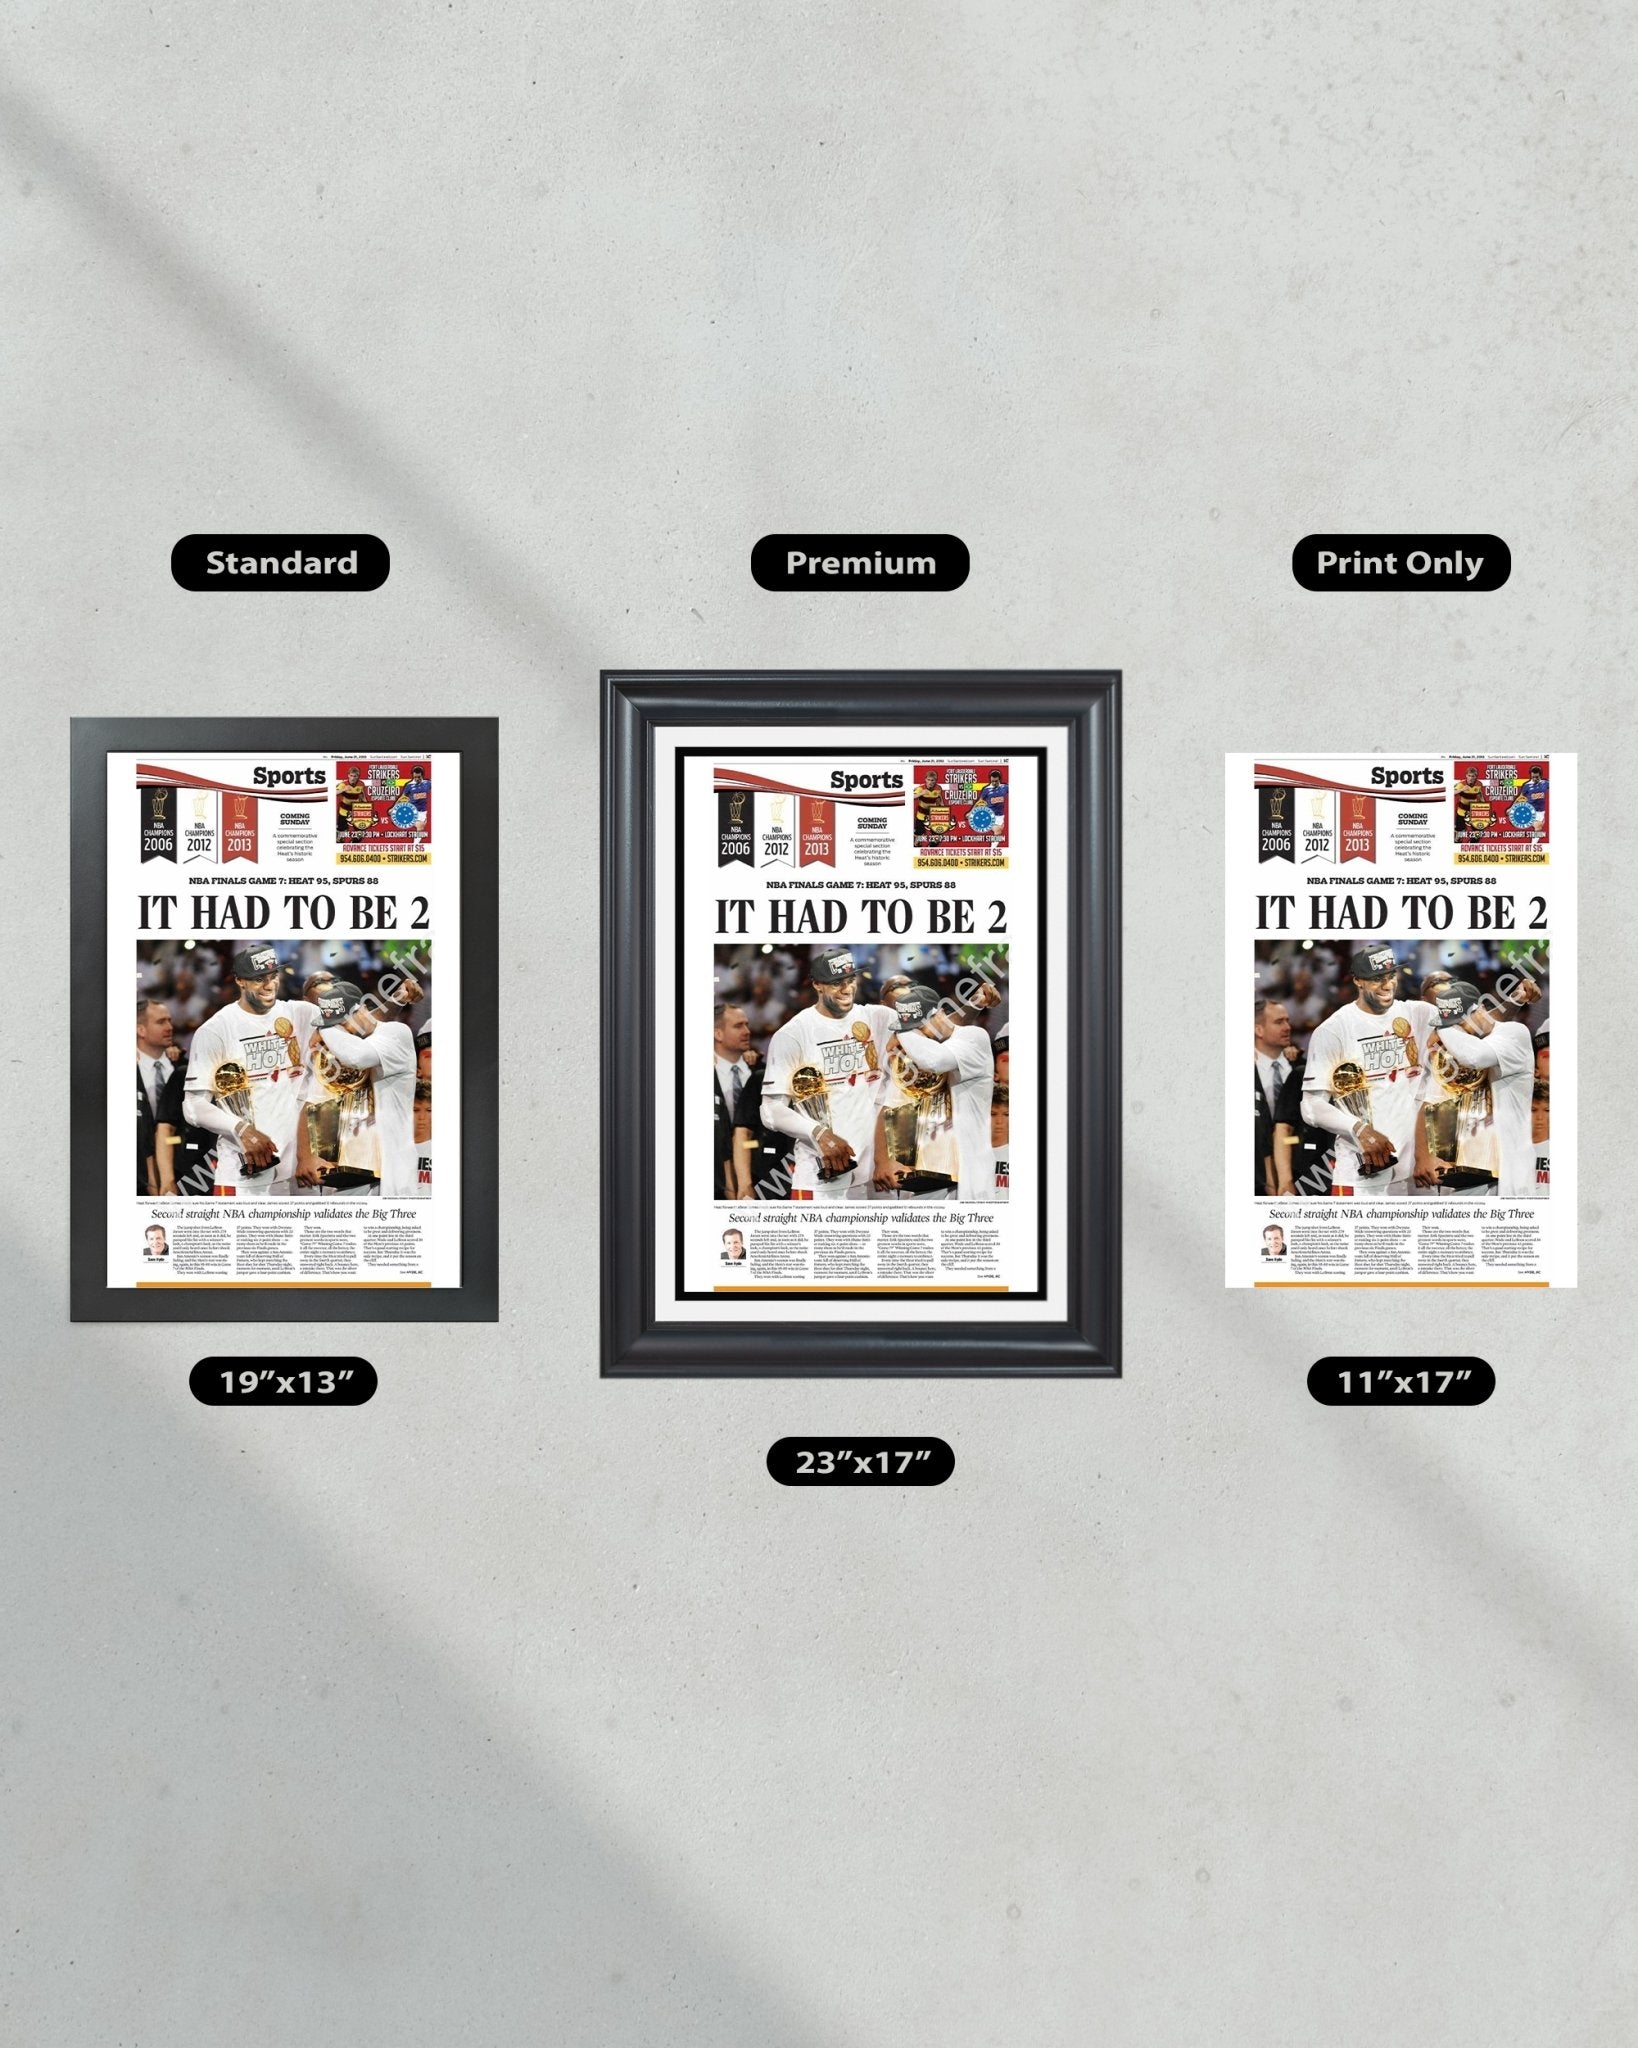 2013 Miami Heat NBA Champions Back to Back Lebron James and Dwyane Wade - Title Game Frames